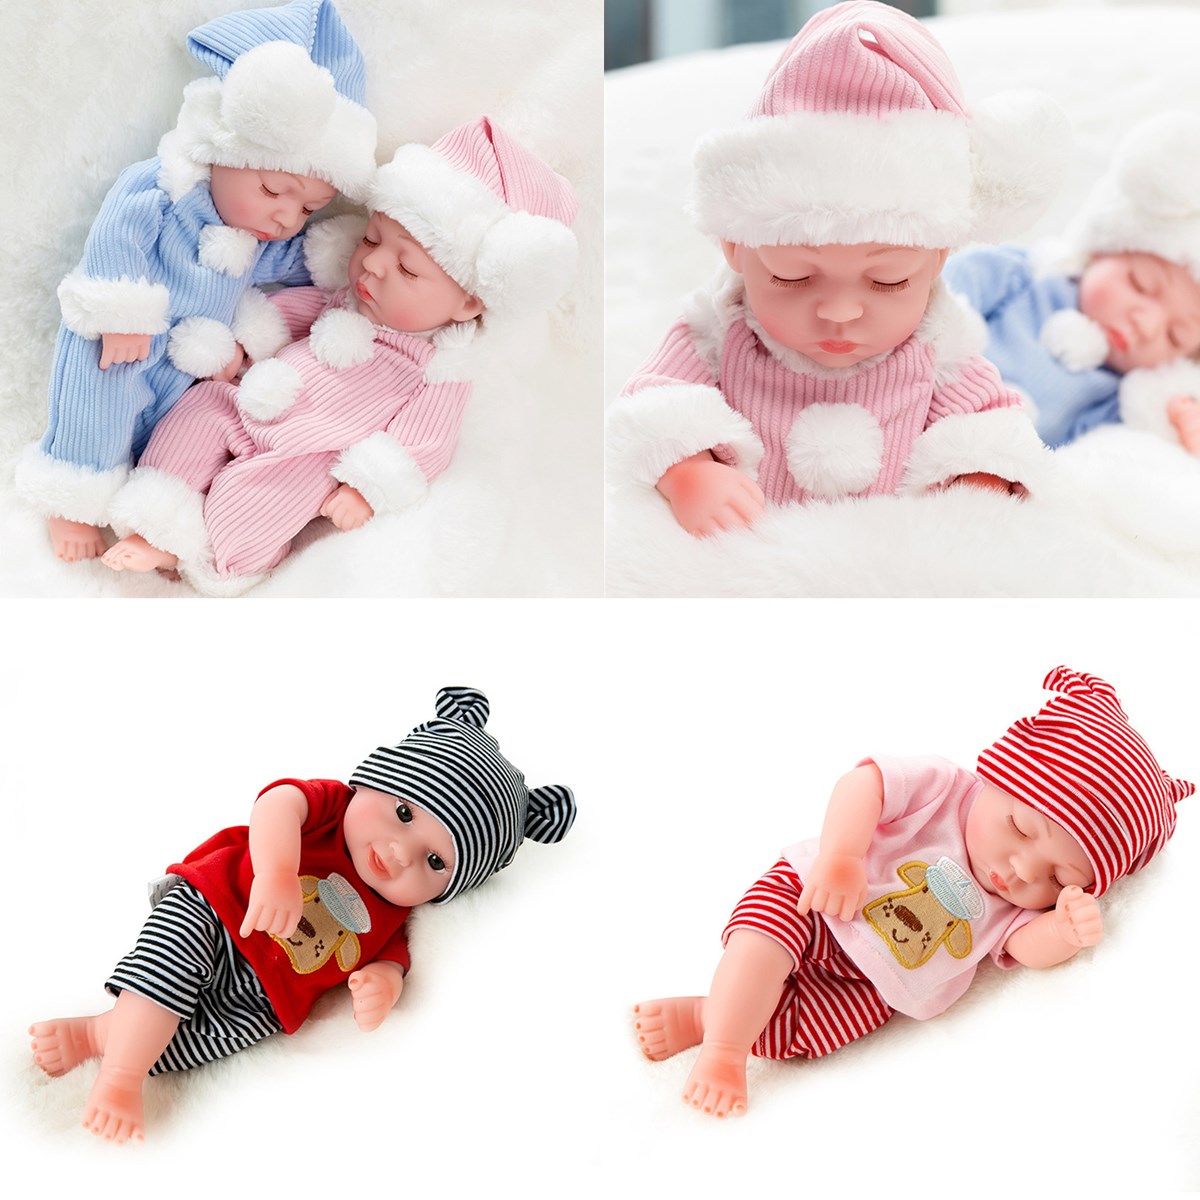 10-Inch-Doll-Reborn-Doll-Reborn-Baby-Soothing-Wet-Water-Toy-1760950-1